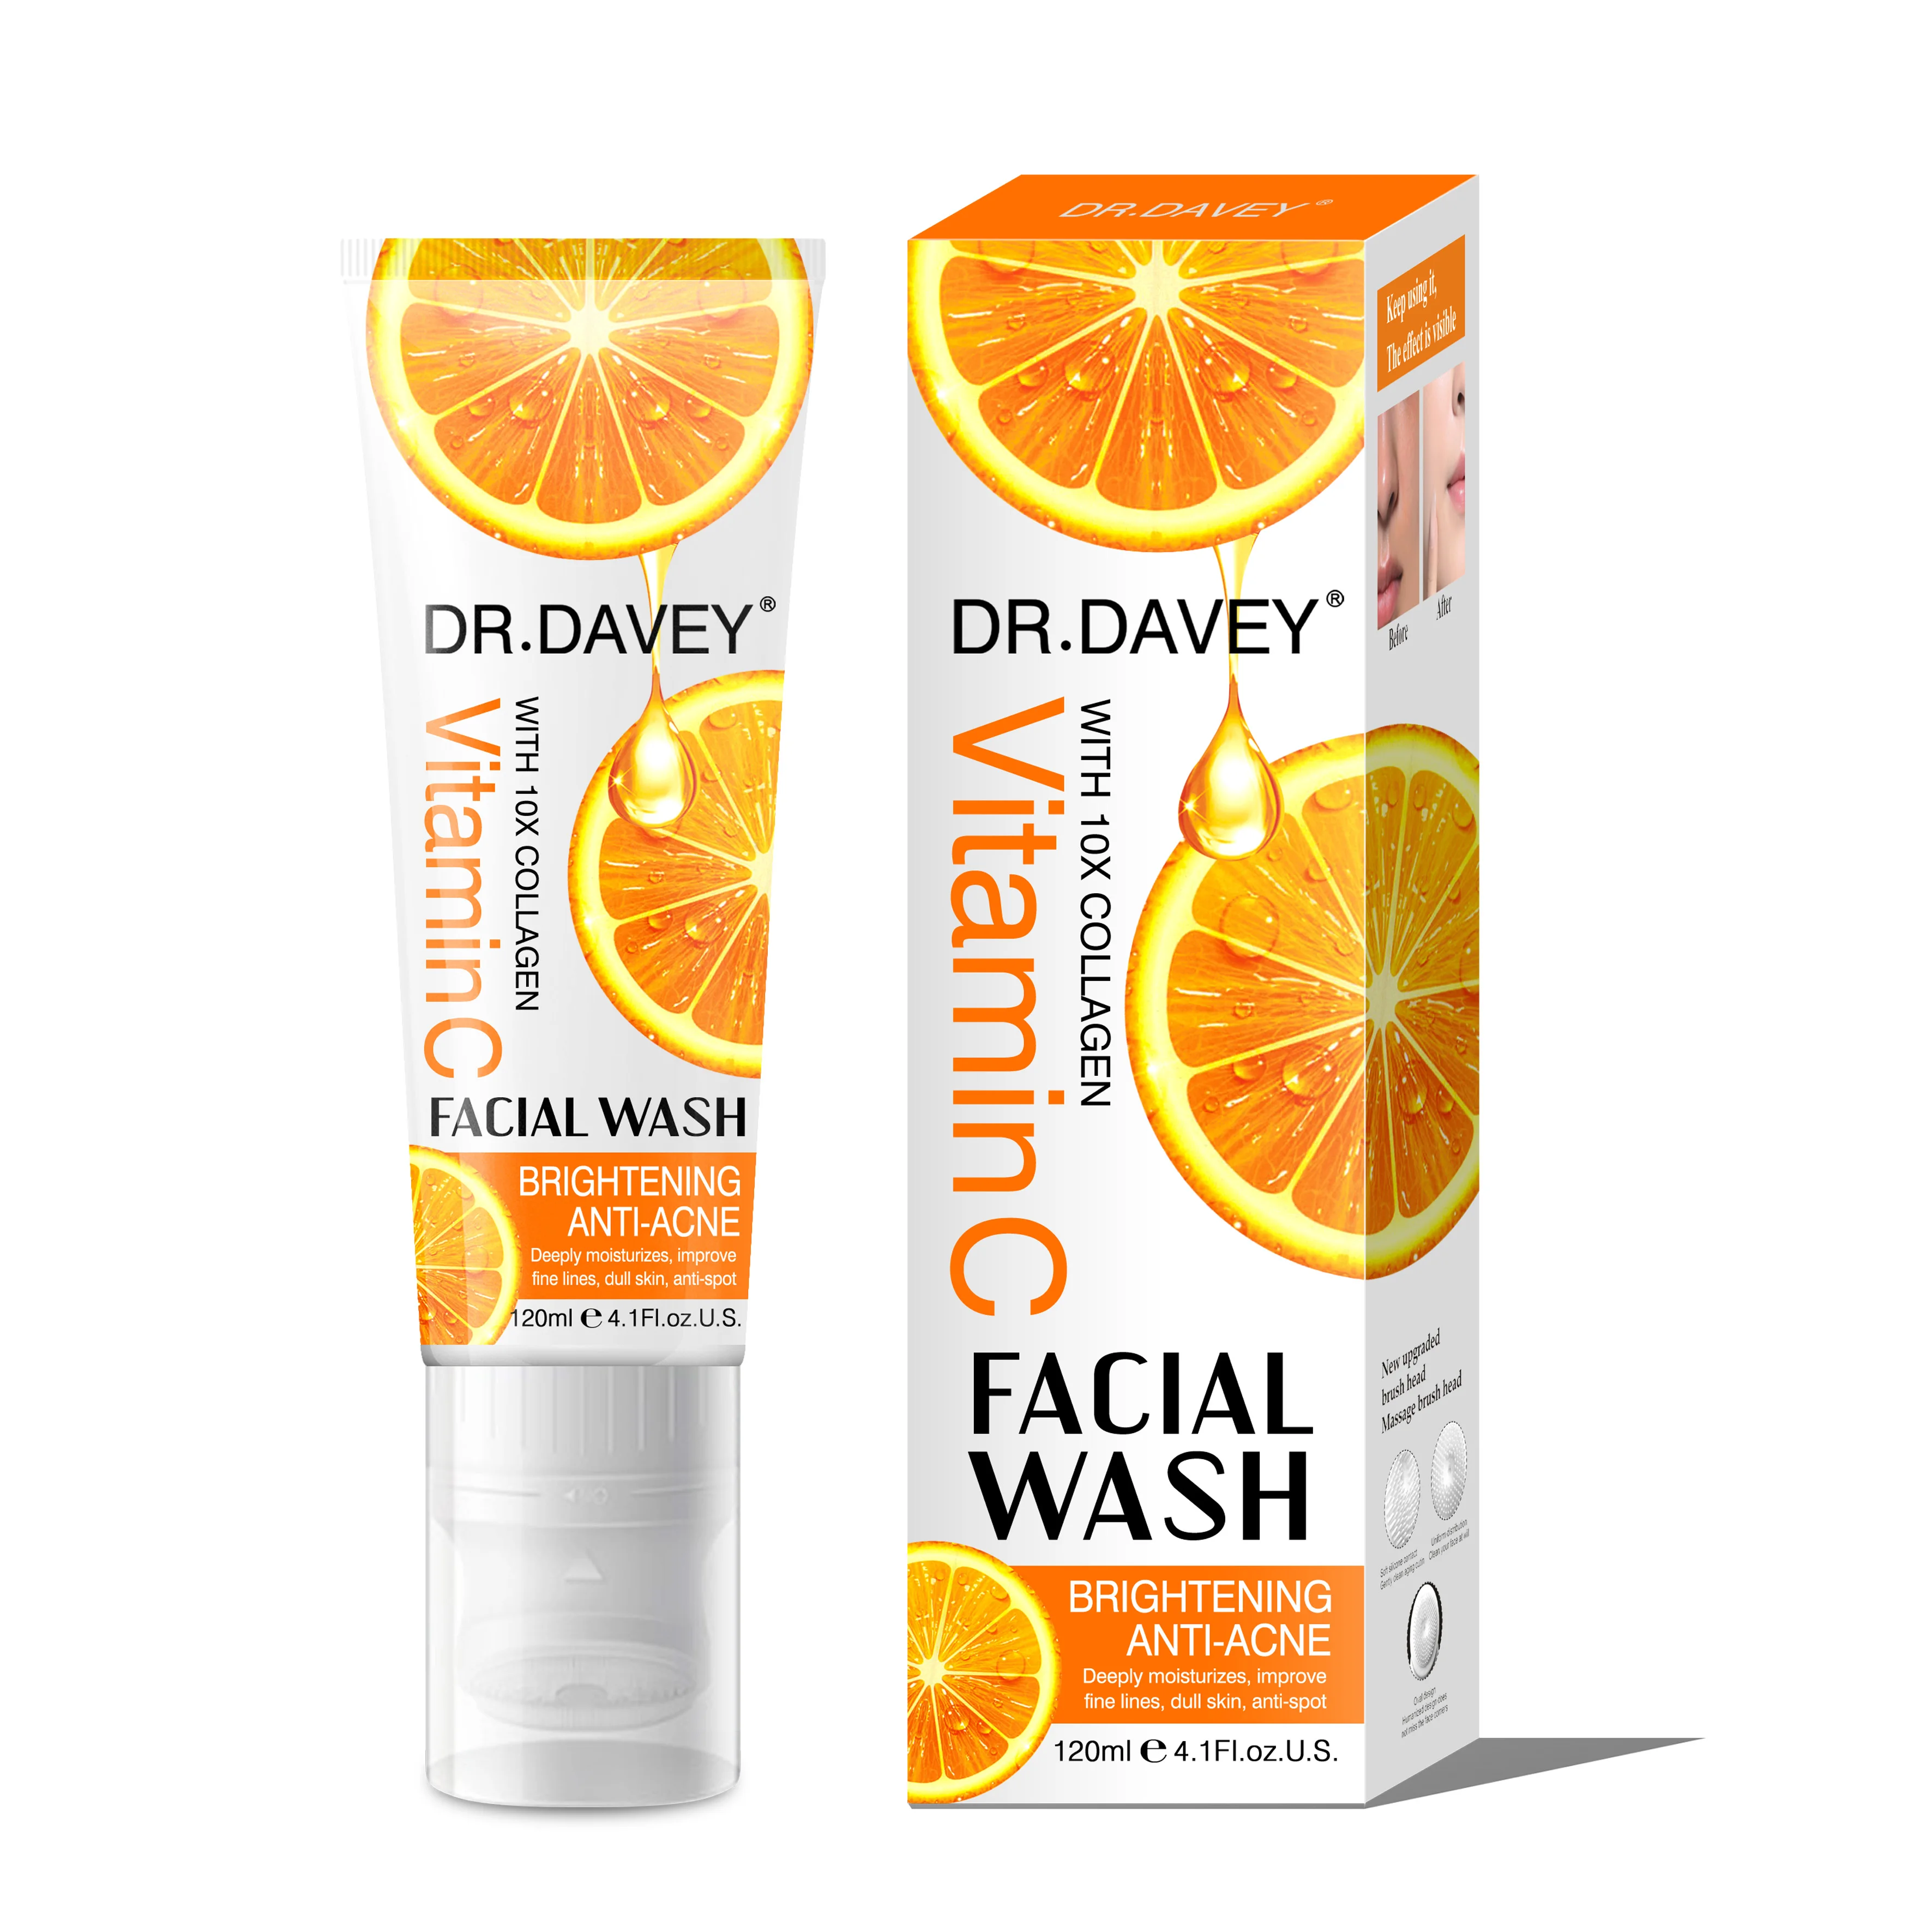 

DR.DAVEY Deep cleansing Refreshing oil control Vitamin C Facial Cleanser, White